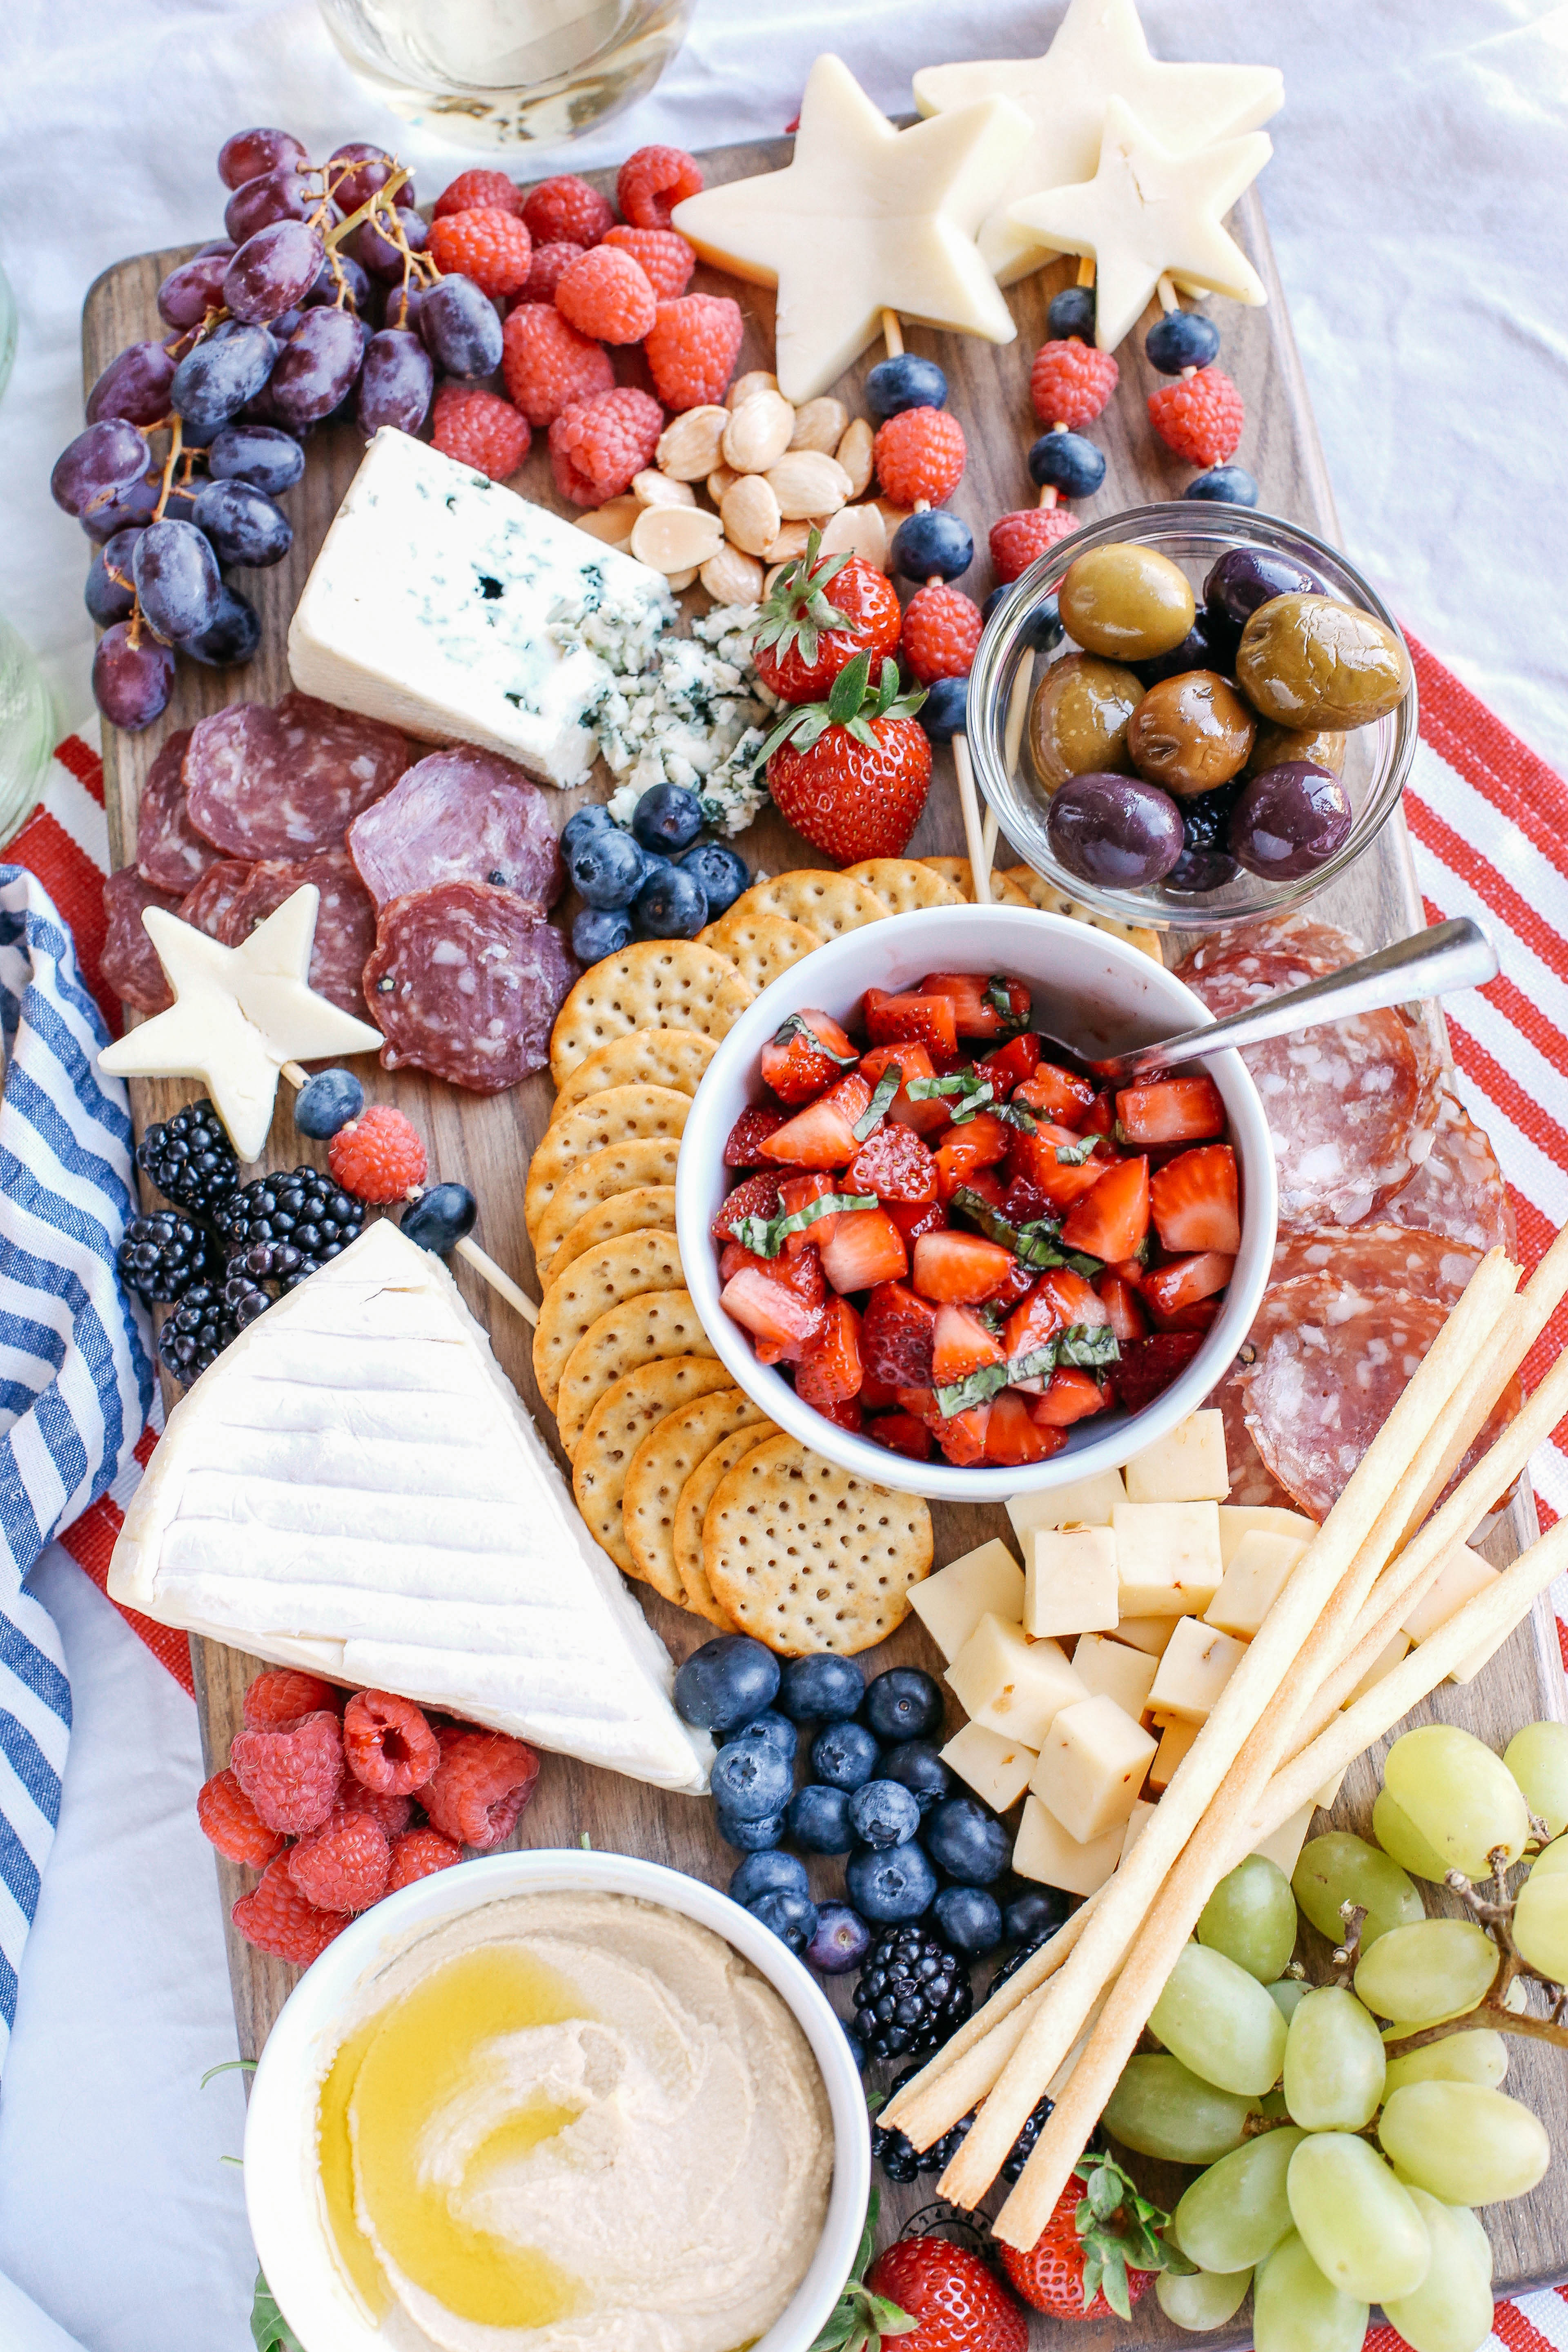 The 4th of July is right around the corner so kick off the summer with the Ultimate Patriotic Cheeseboard! Grab your favorite bottle of wine and share this festive appetizer with your friends and family this holiday!